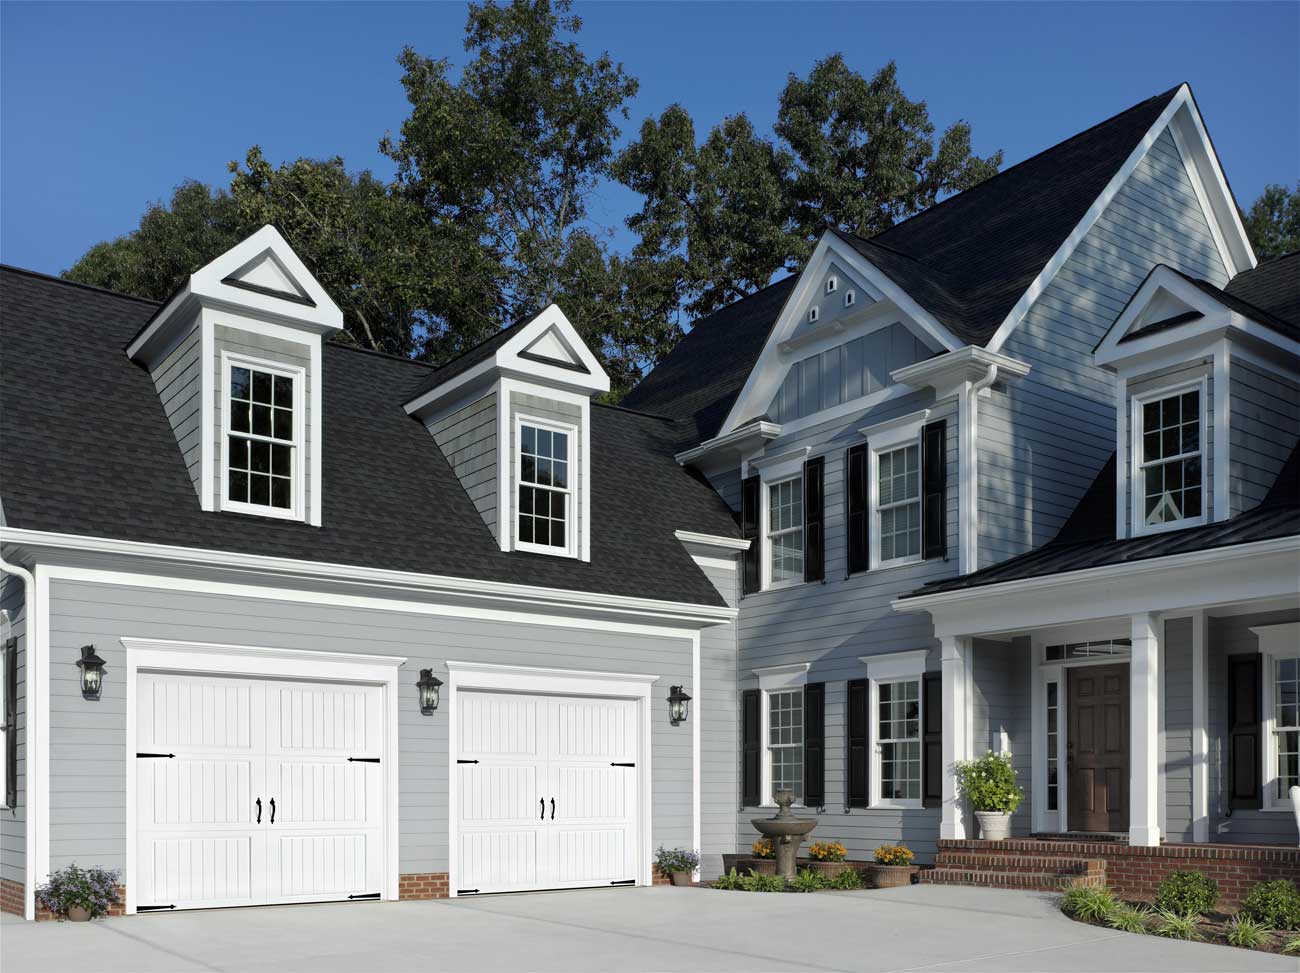 This is an image of white steel garage doors on a Cape Code home with no windows.